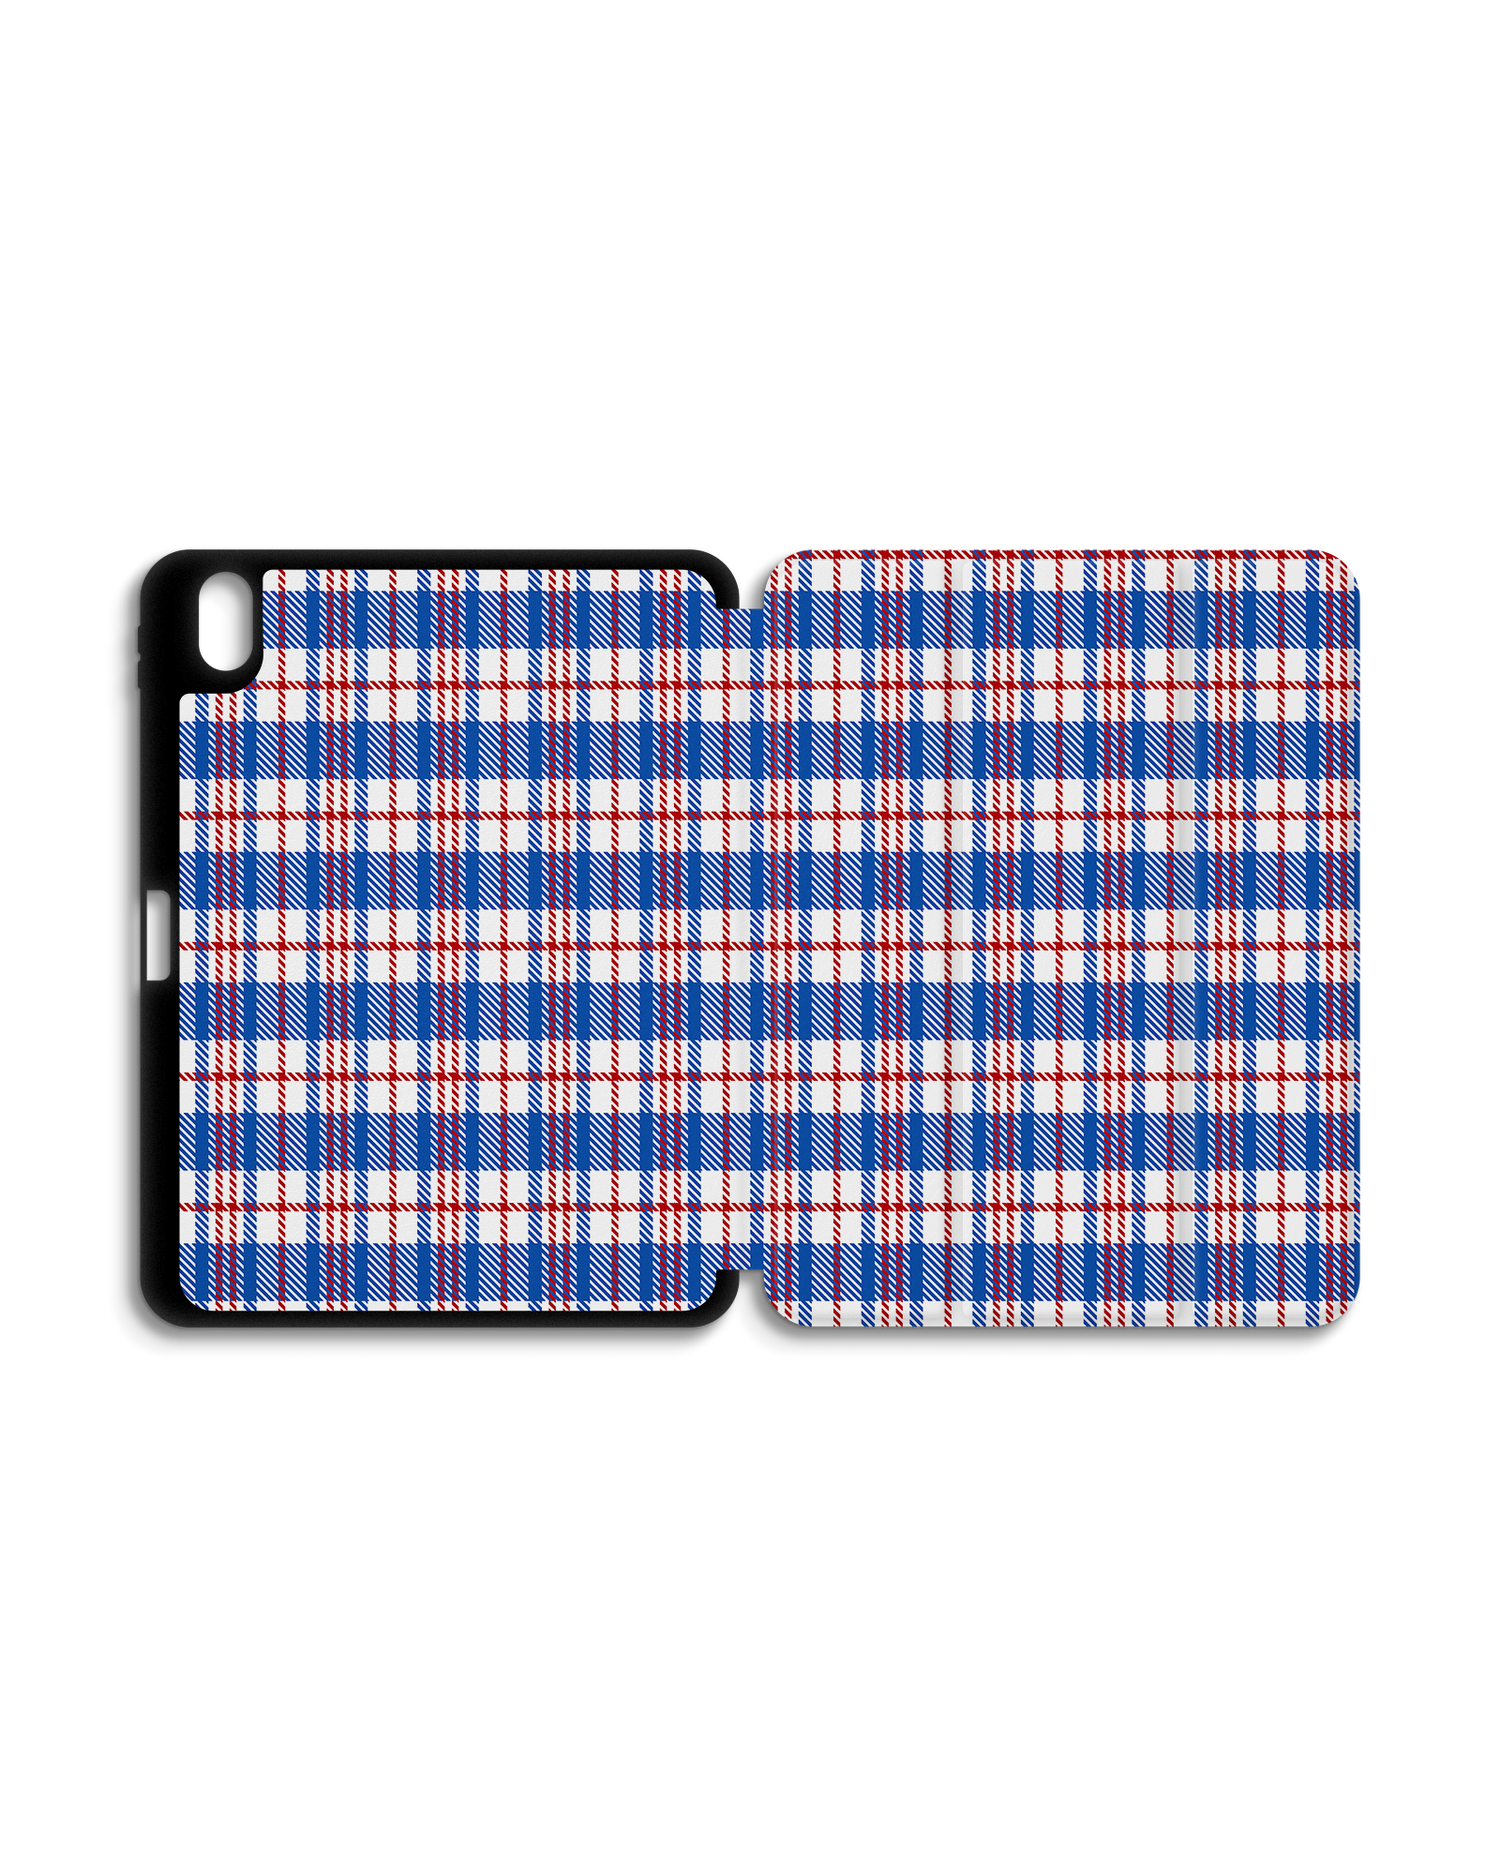 Plaid Market Bag iPad Case with Pencil Holder for Apple iPad (10th Generation): Opened exterior view